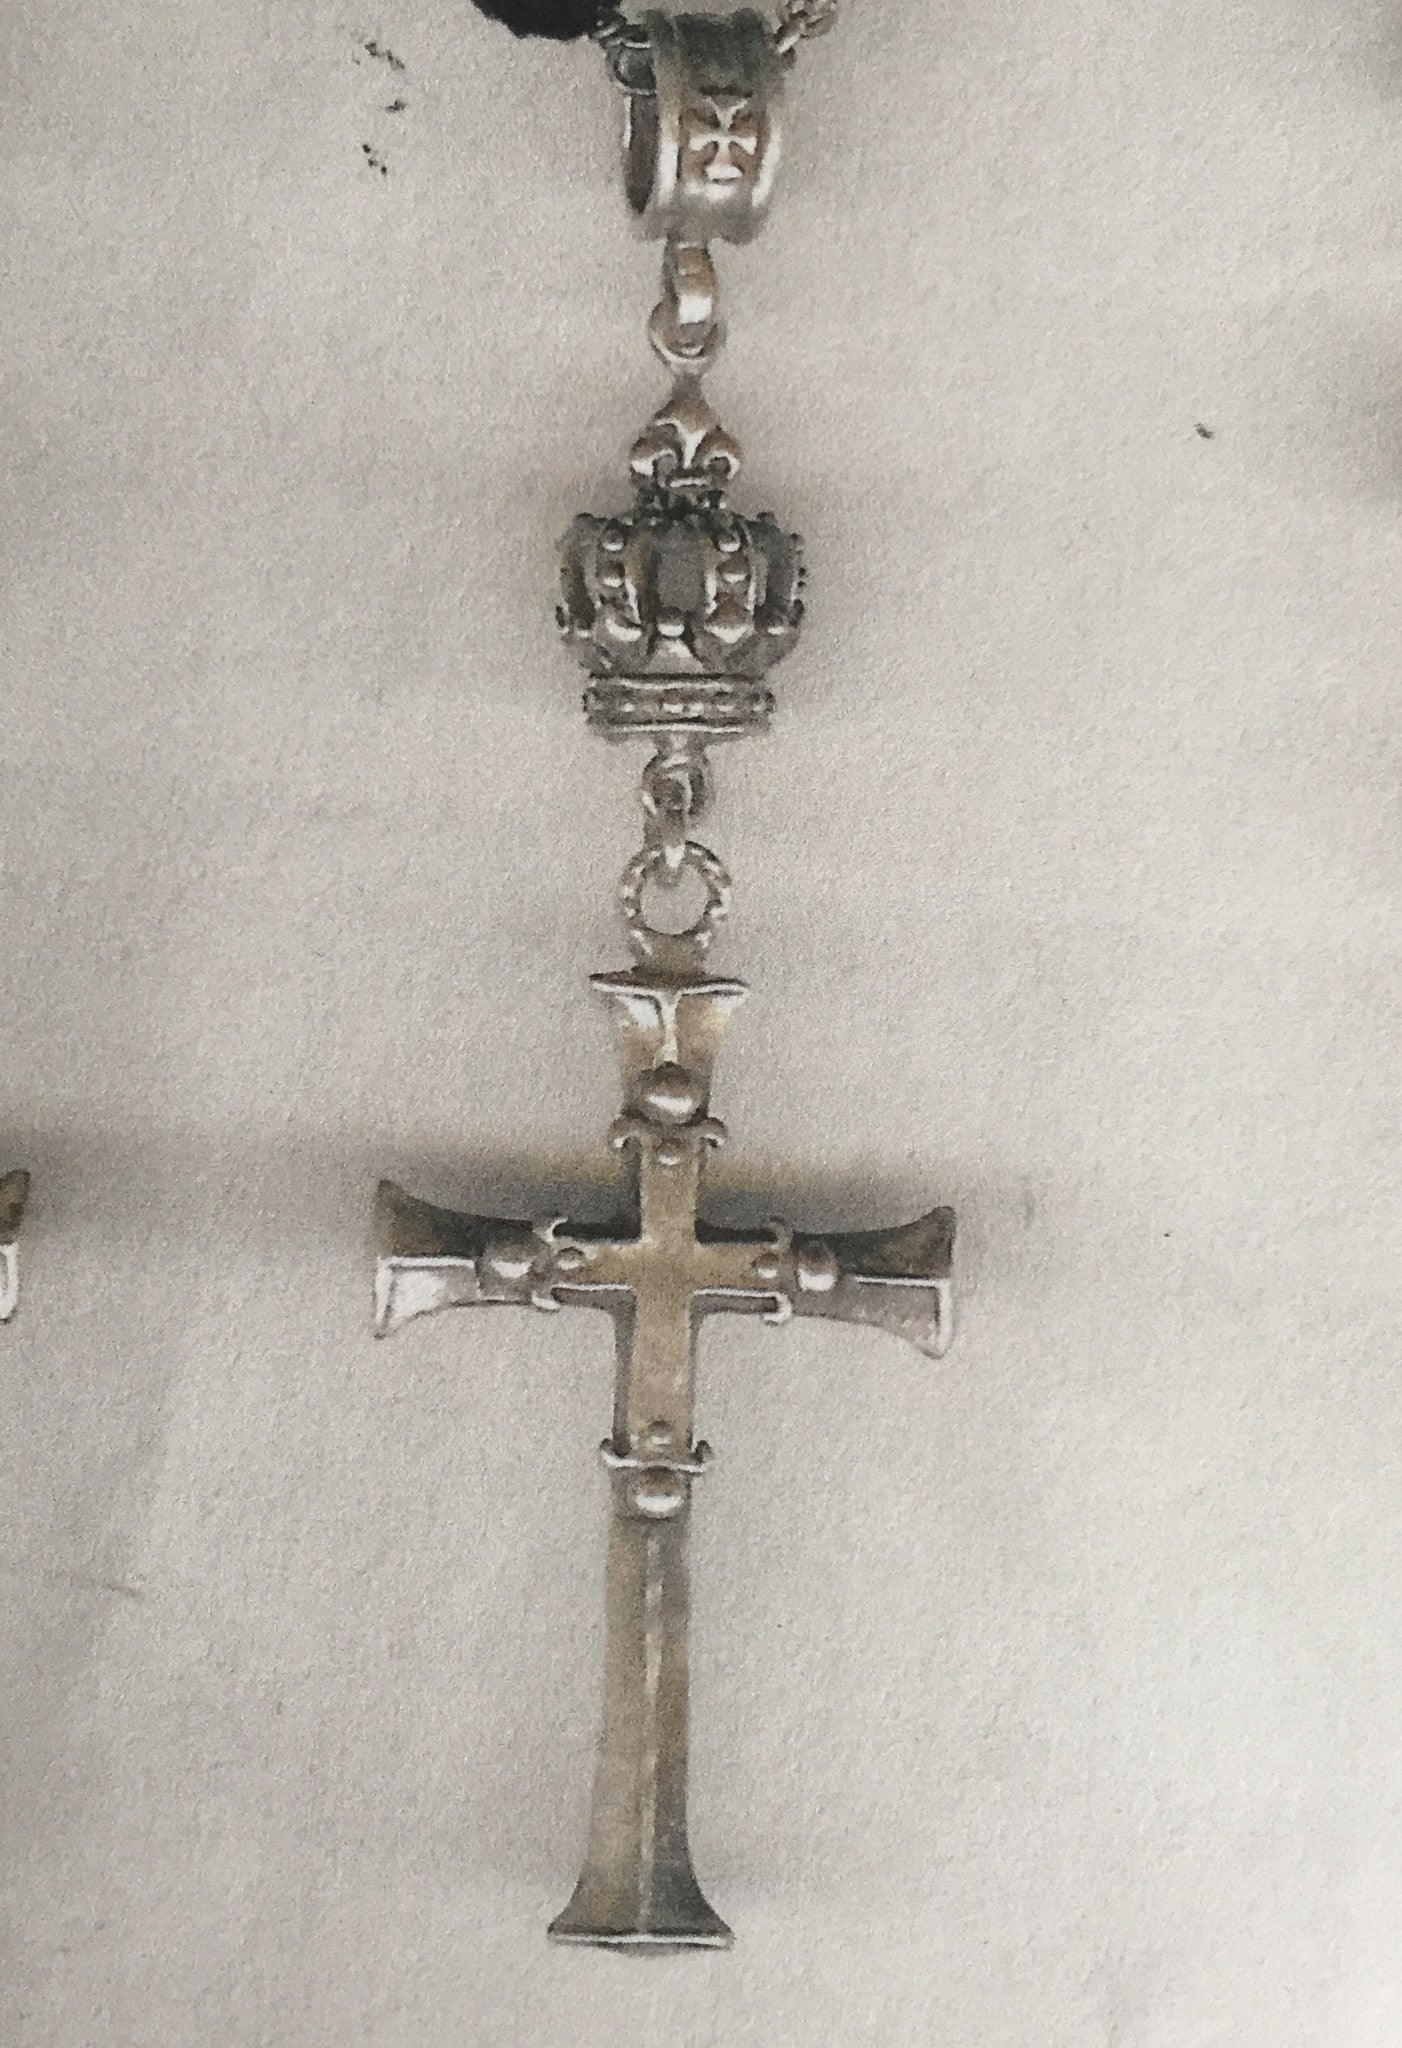 Sterling Silver Diamond Cross with Diamond Crown and Black Onyx Beads